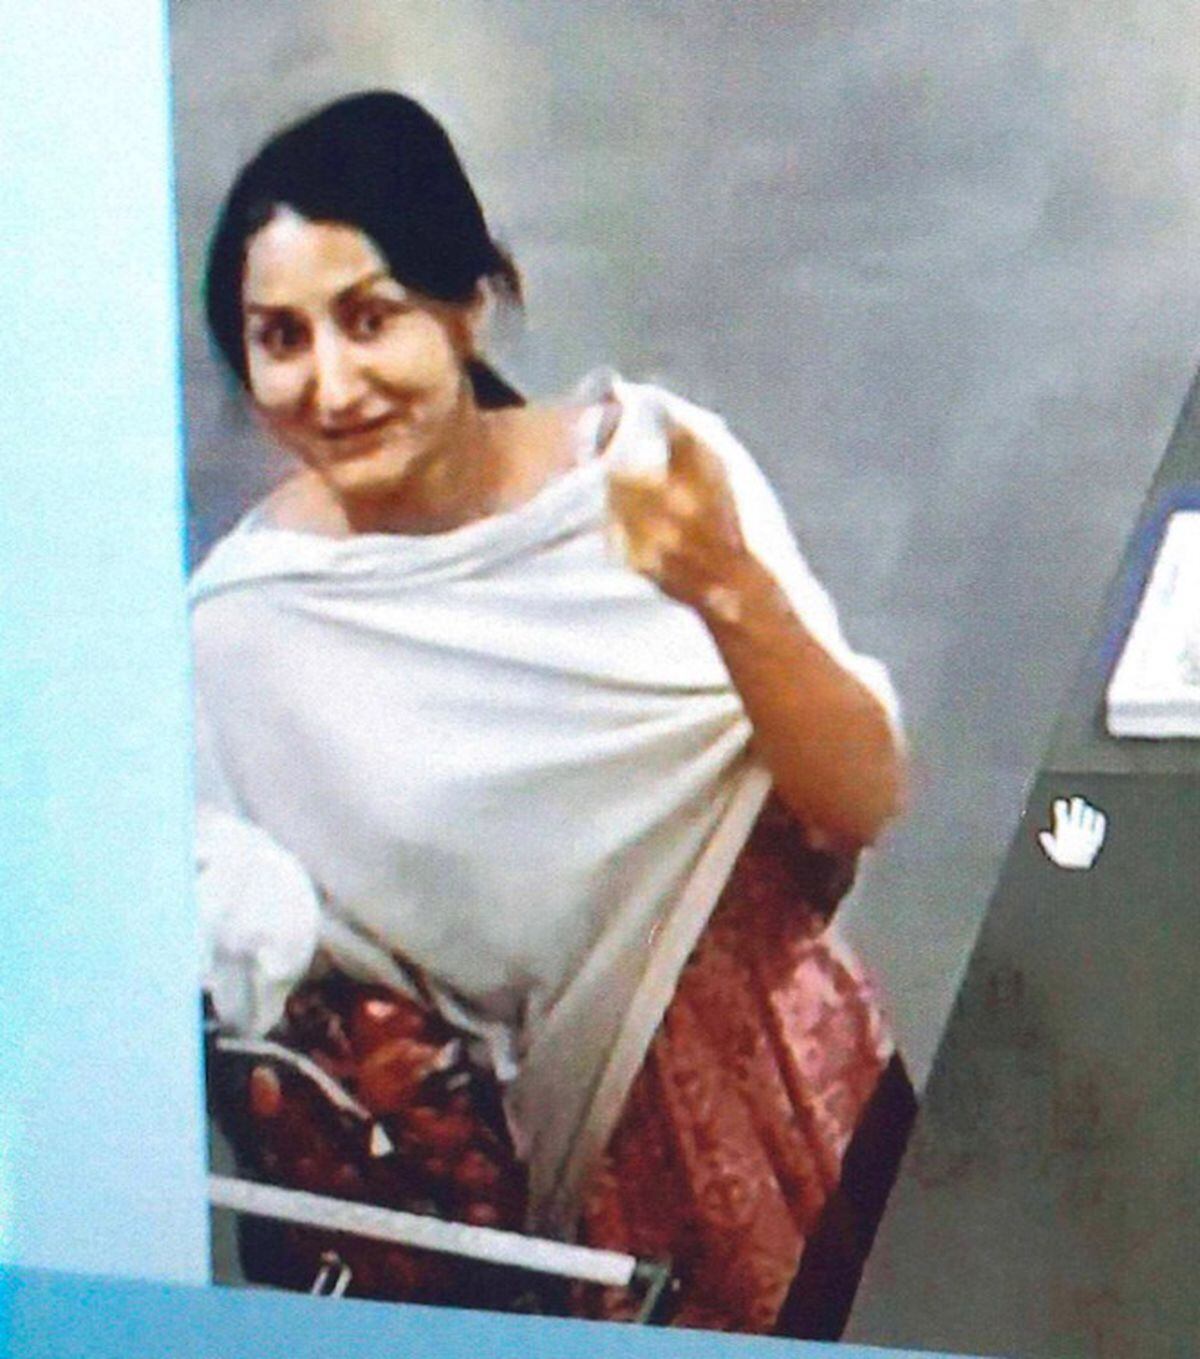 Narinder Kaur was caught on CCTV at a Marks & Spencer store as she defrauded the retailer. Photo: CPS